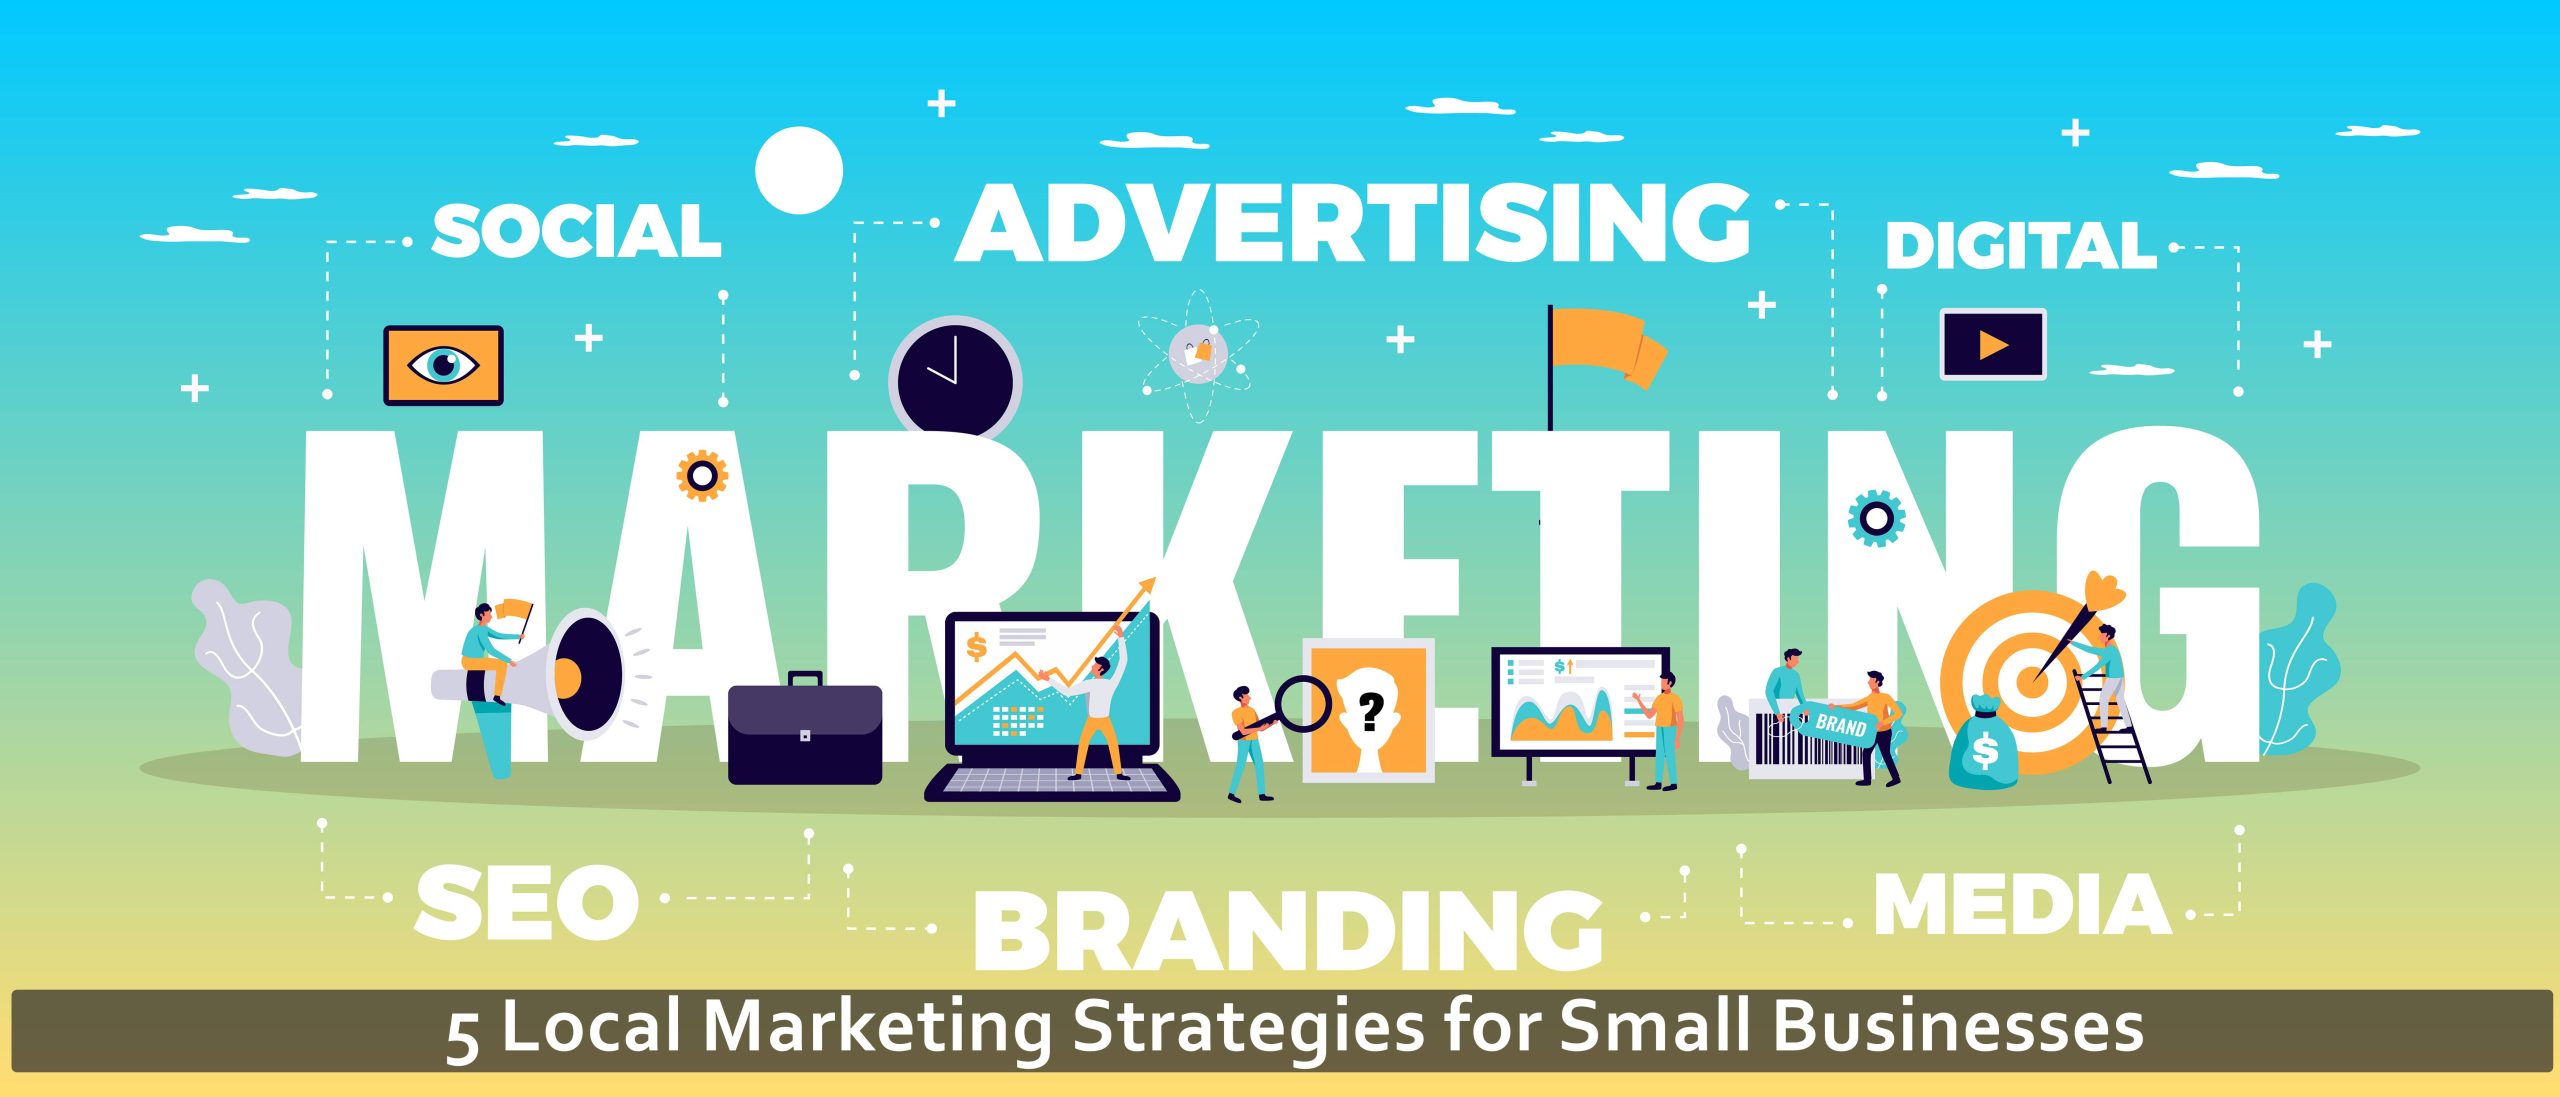 5 Local Marketing Strategies for Small Businesses